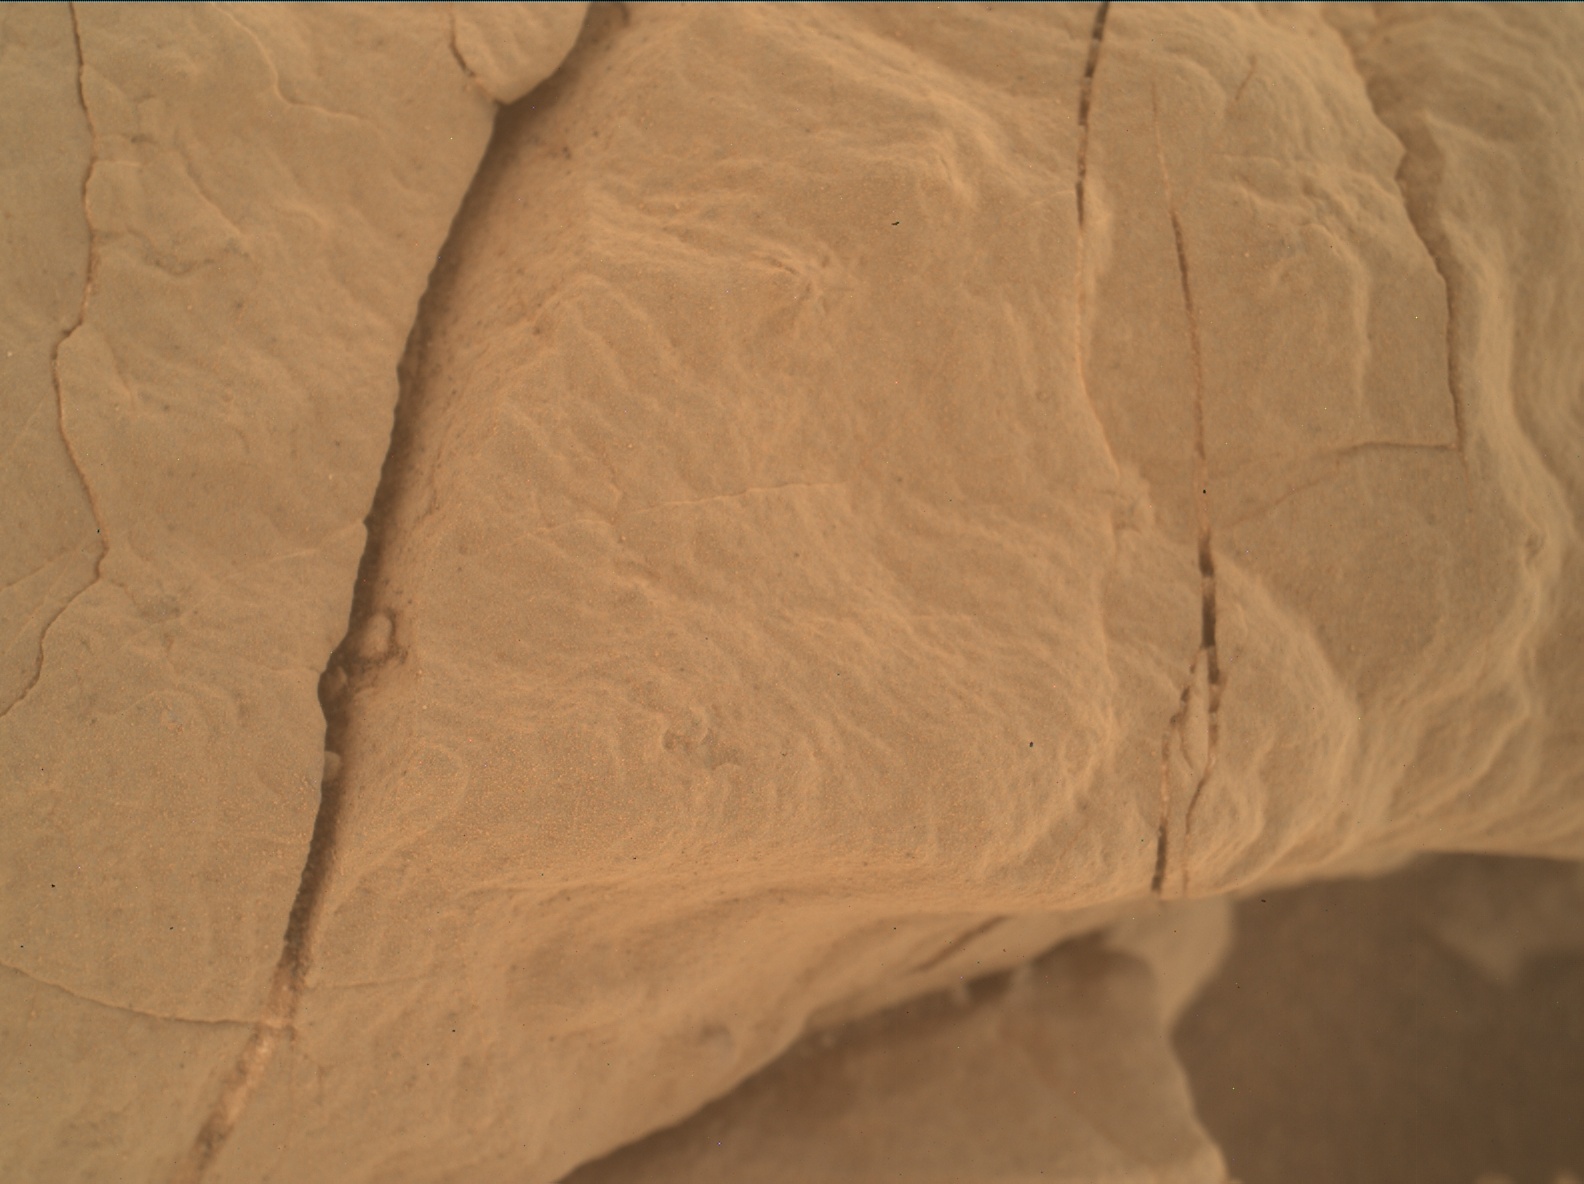 Nasa's Mars rover Curiosity acquired this image using its Mars Hand Lens Imager (MAHLI) on Sol 2645